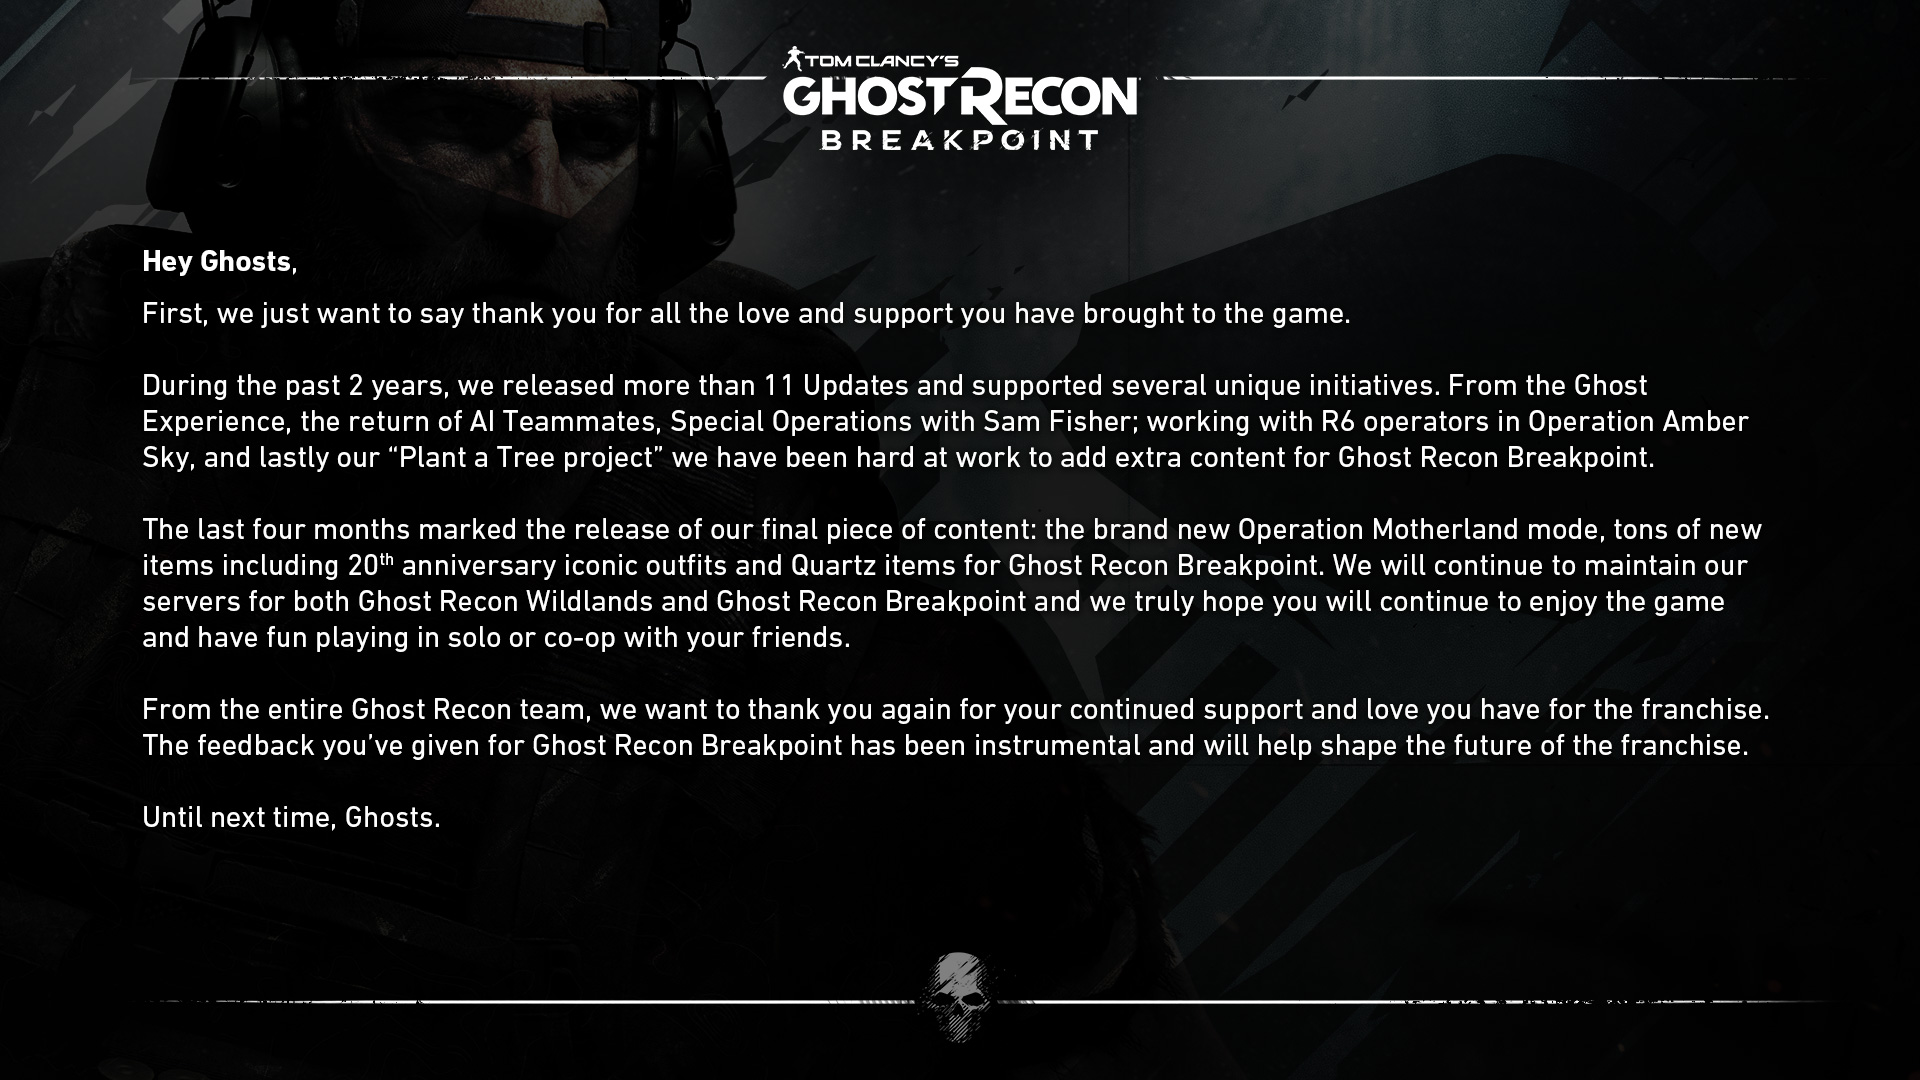 Ghost Recon on X: "Hey Ghosts, we have an important message we would like to share with all 👇 https://t.co/kYeyVWVtgi" / X